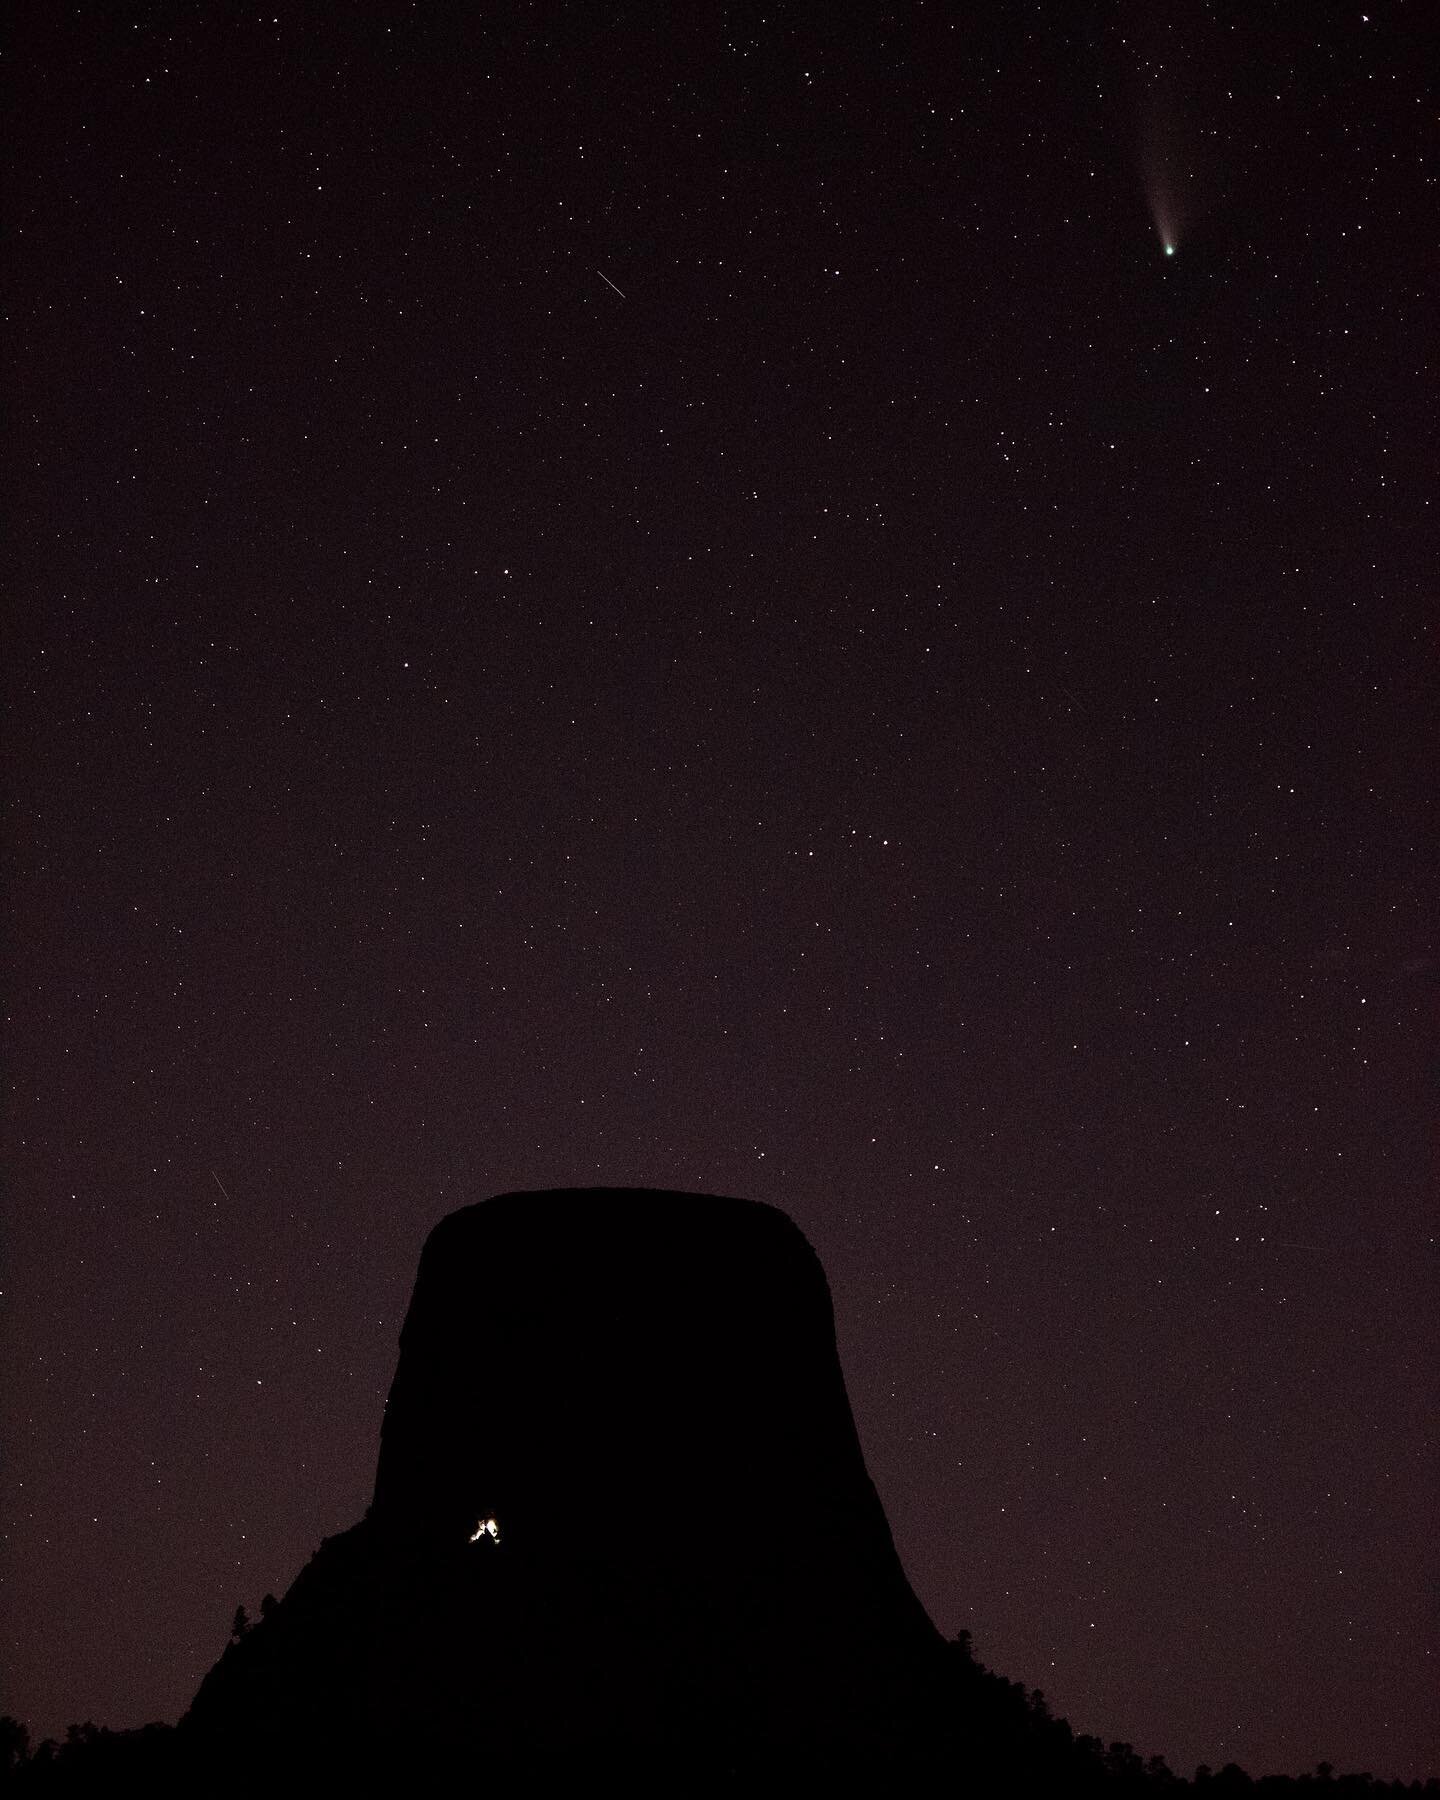 I know everyone is likely tired of NEOWISE photos, but I spent my birthday yesterday shooting it as it passed above Bear Lodge/Devils&rsquo;s Tower. 
.
.
.
.
.
.
.
.
.
.
. 
#Photojournalism #nightphotography #stars #astrophotography #neowise #astrono